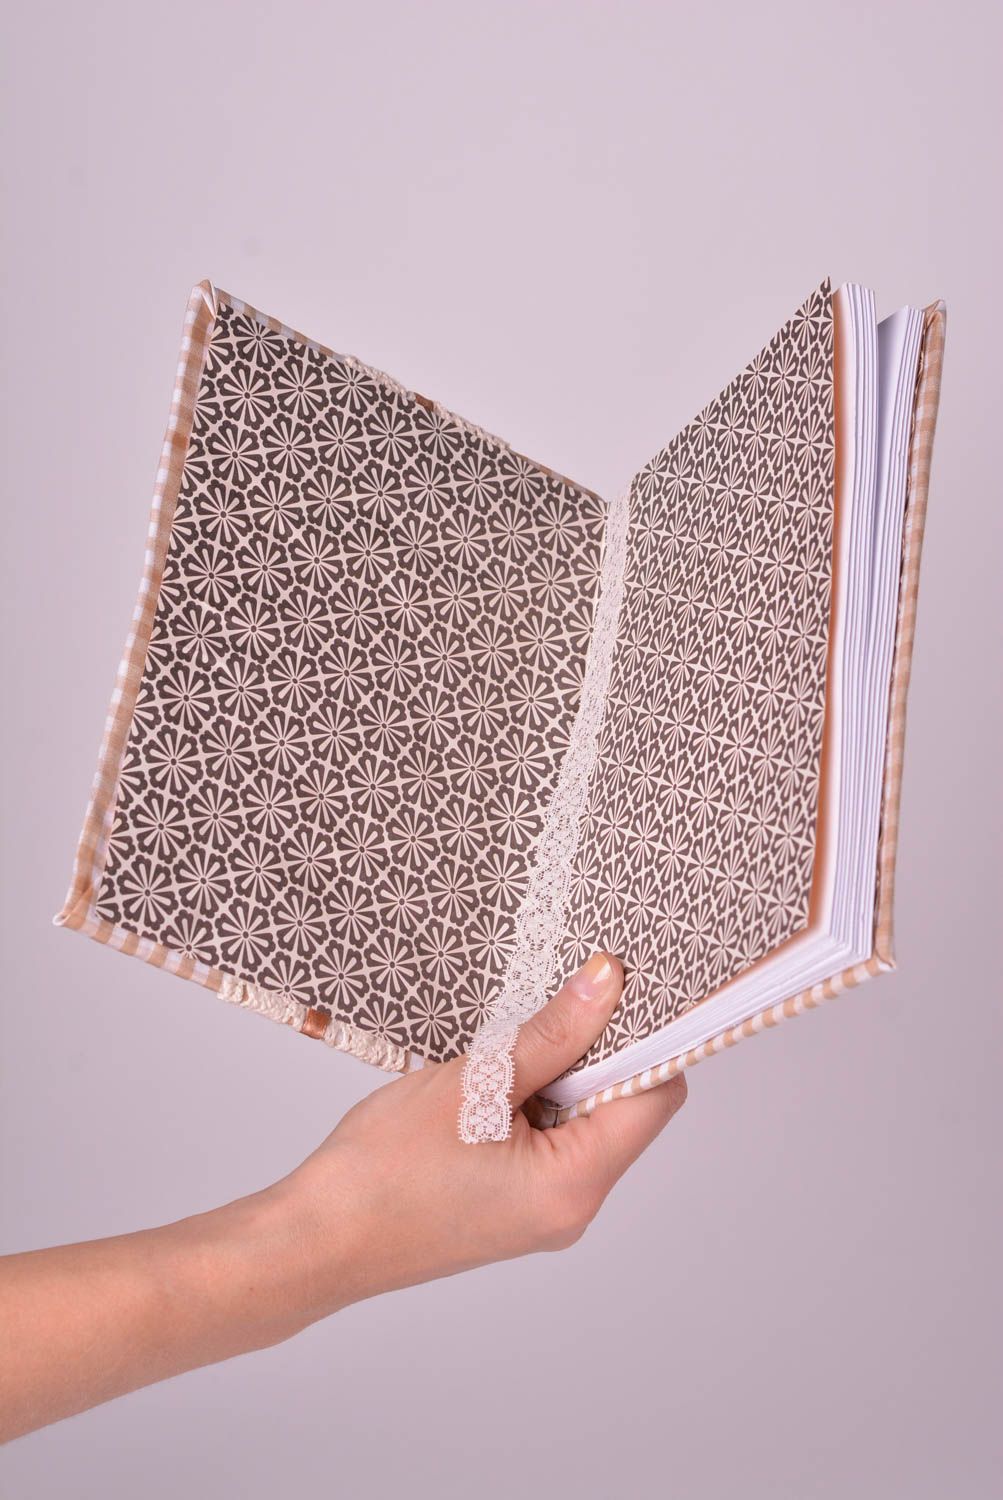 Handmade notebook handmade sketchbook checkered notepad with lace cover photo 2